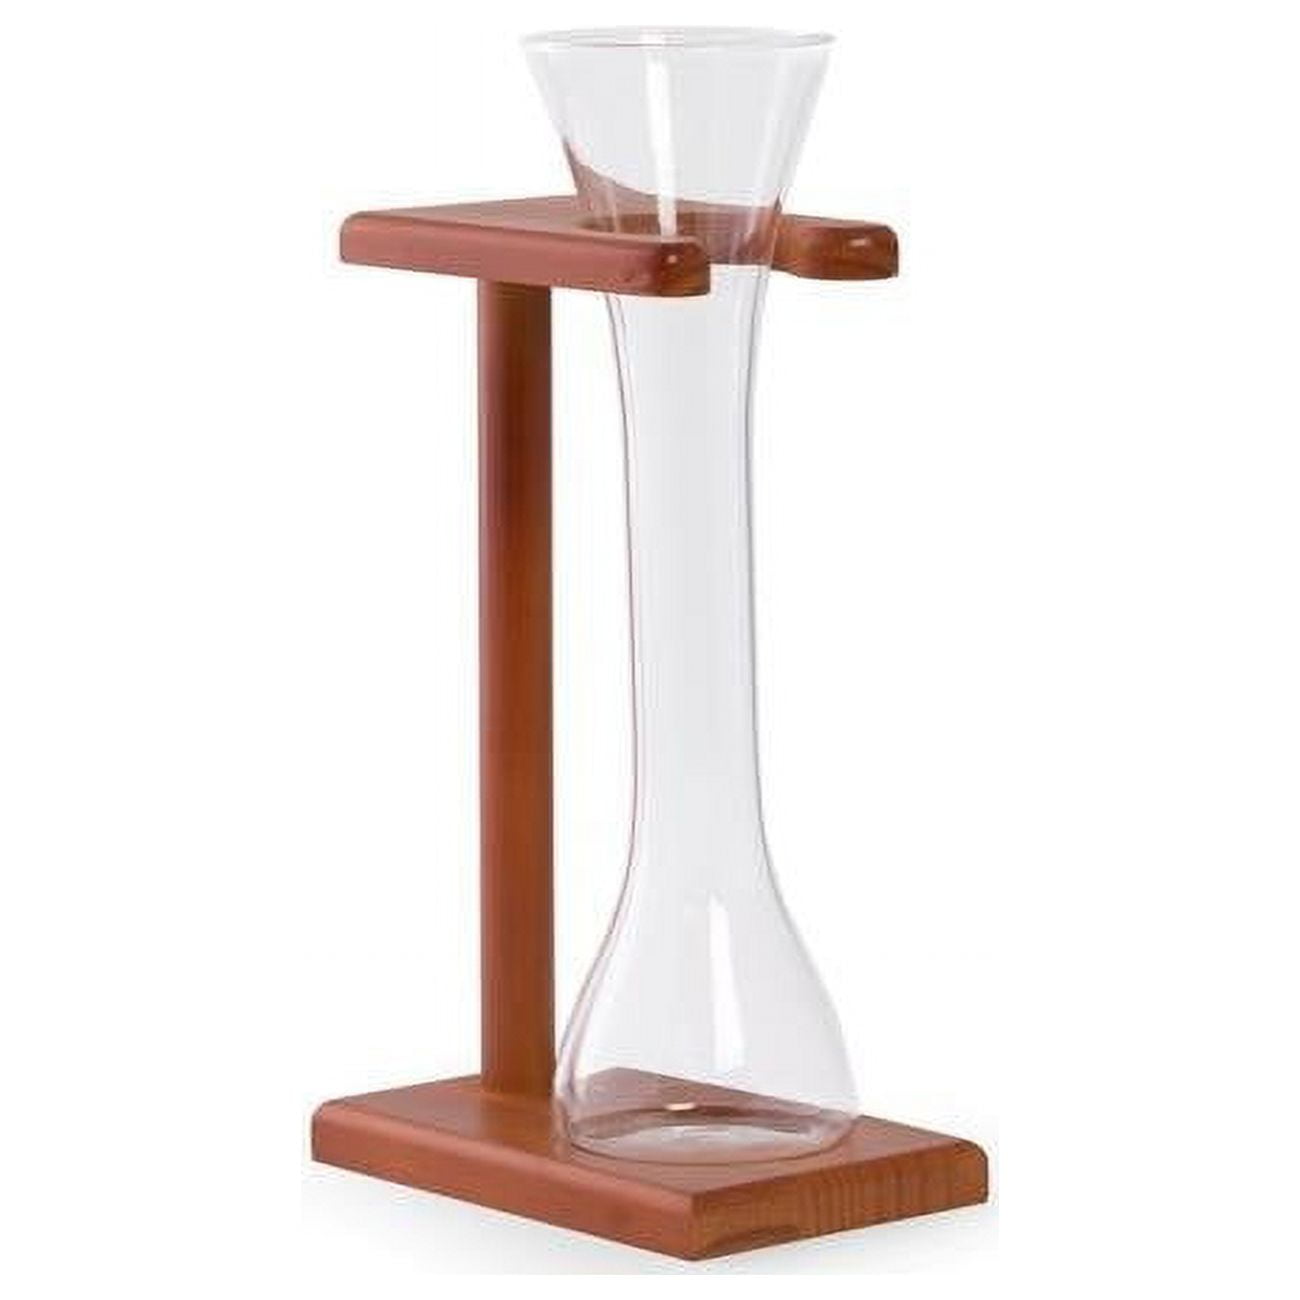 Picture of Bey-Berk International BS111S 12 oz Quarter Yard of Ale Glass with Wooden Stand